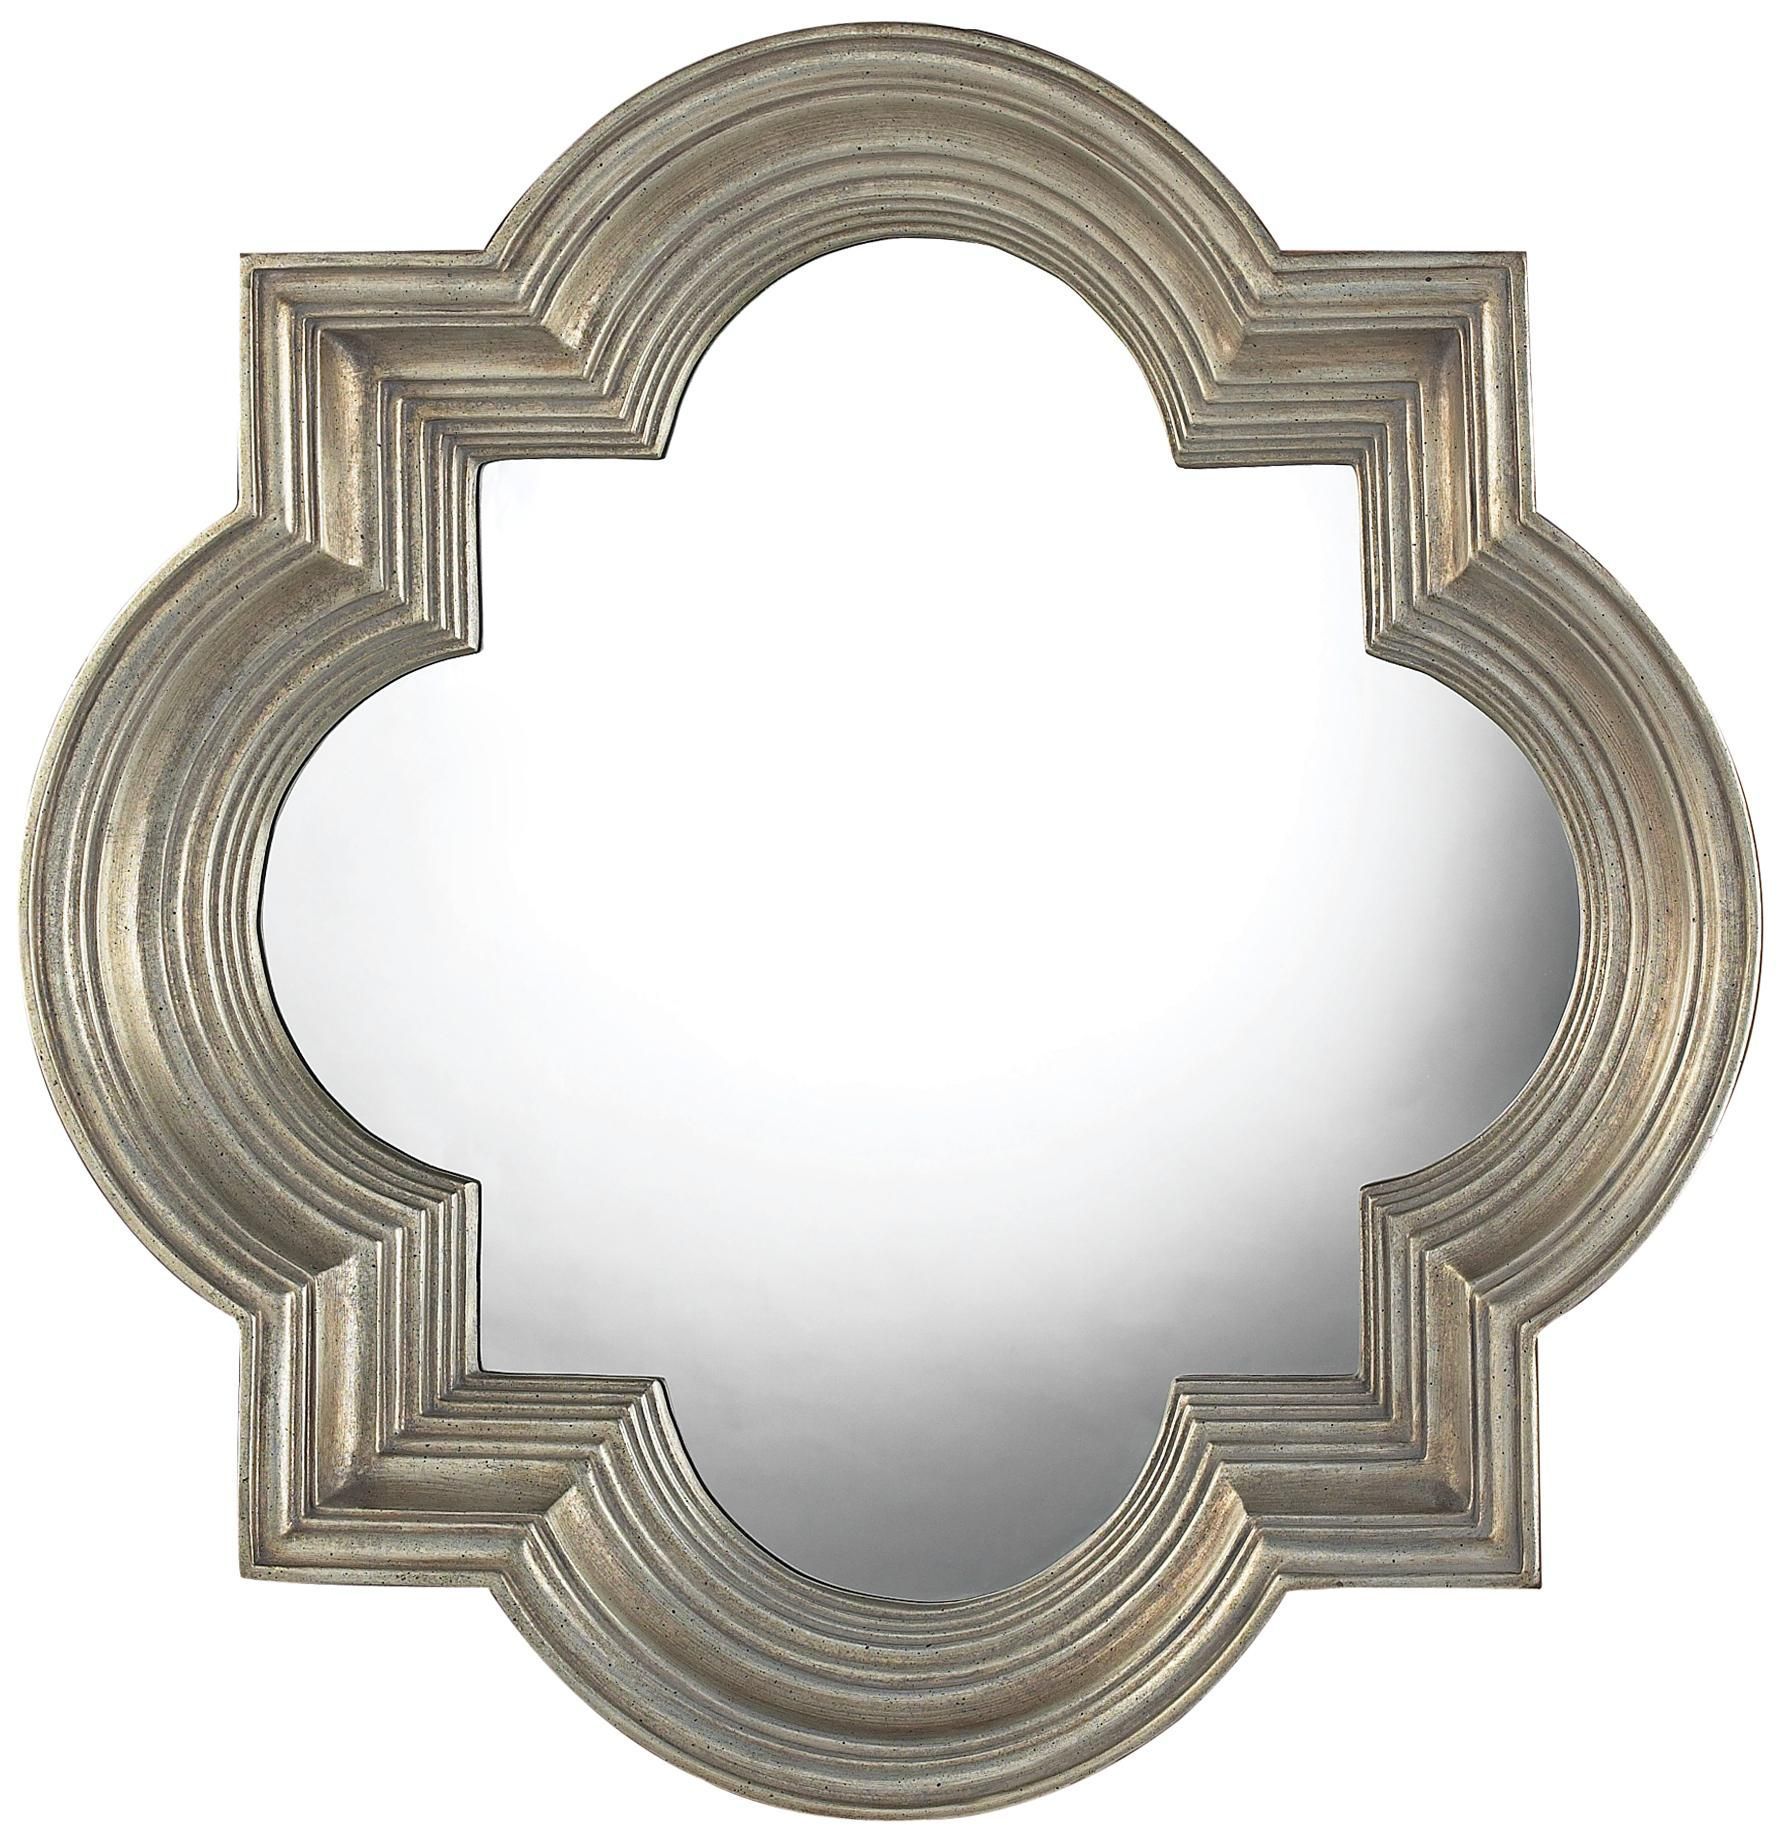 Osbourne Midland Silver 30" High Mirror – #x7138 | Lamps Plus | Framed With Regard To Metallic Silver Framed Wall Mirrors (View 14 of 15)